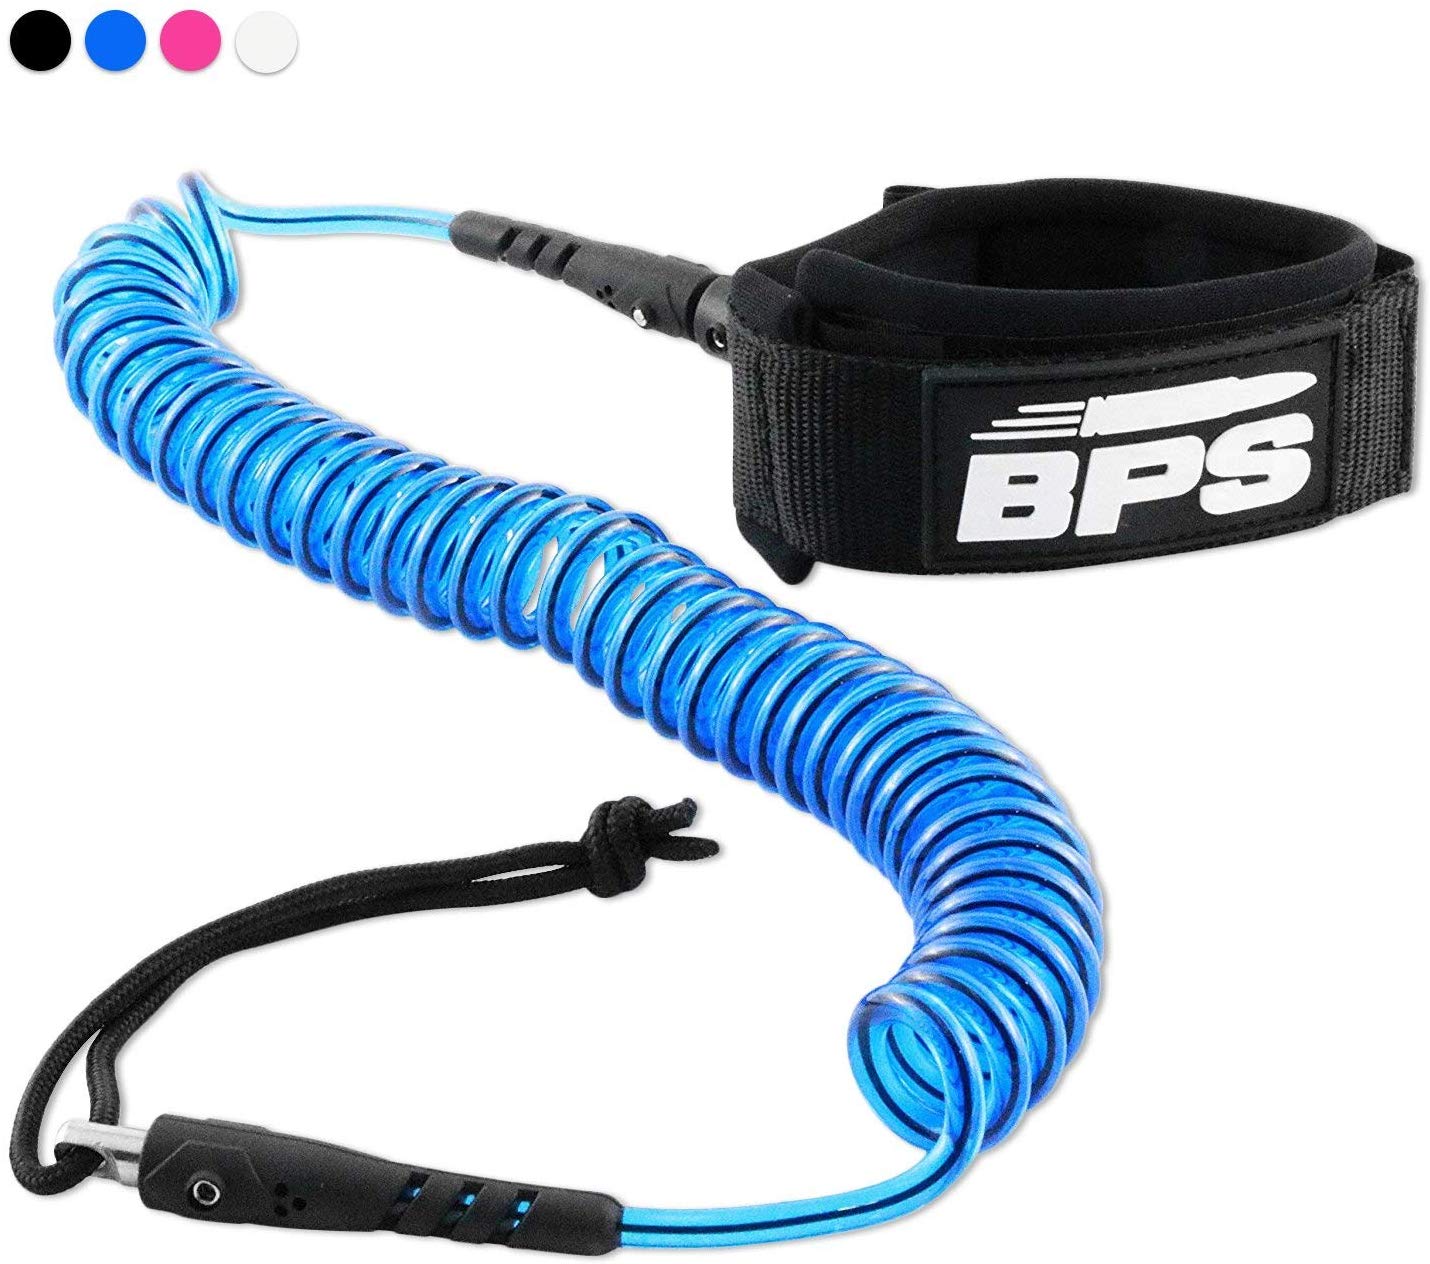 BPS ‘Storm’ Ultralite 10 Foot Coiled SUP Surf Leash